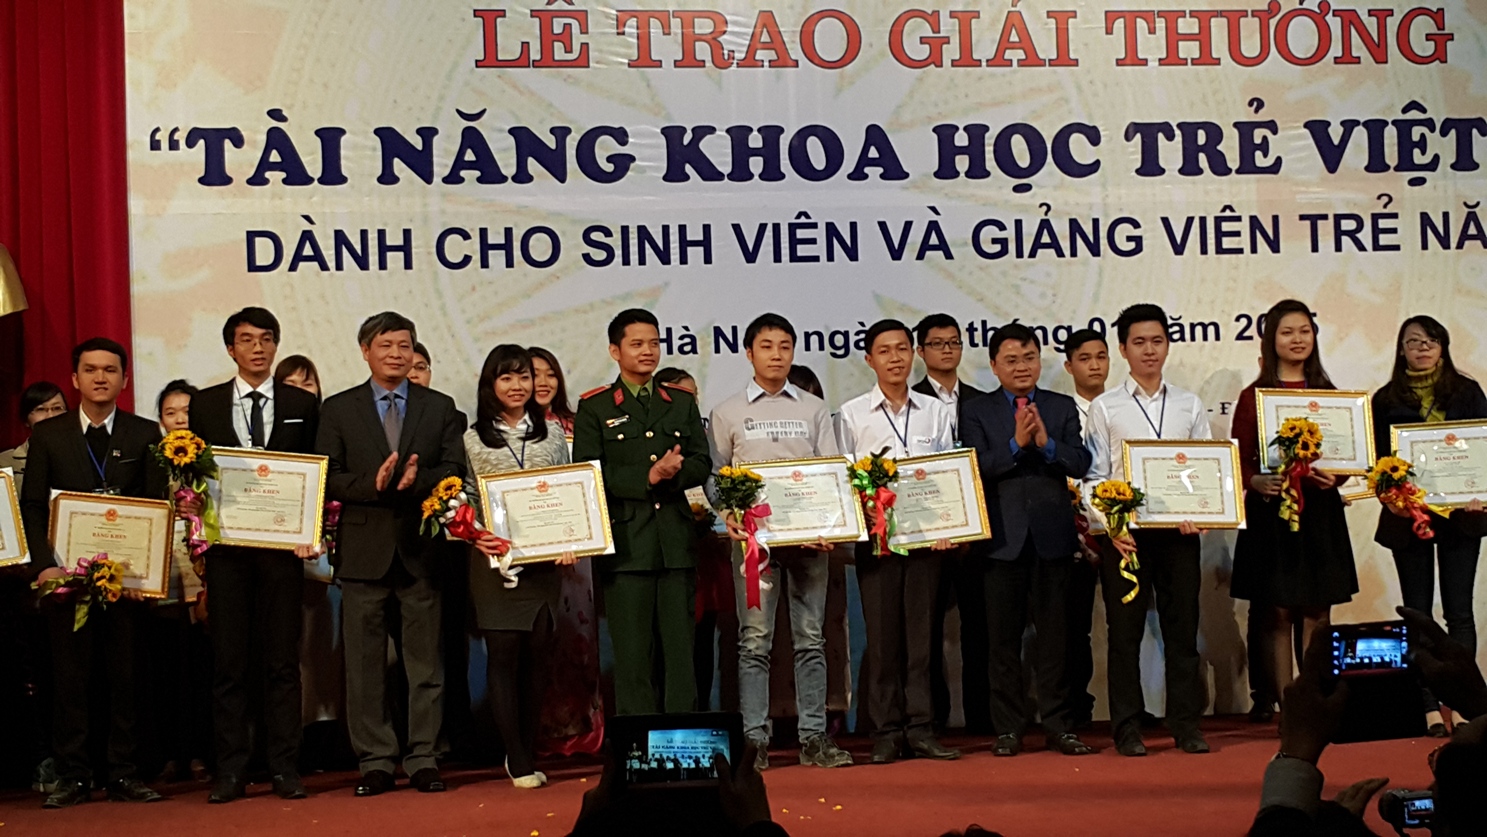 HUTECH students receive the 2014 "Vietnamese Young Science Talents" Award 22